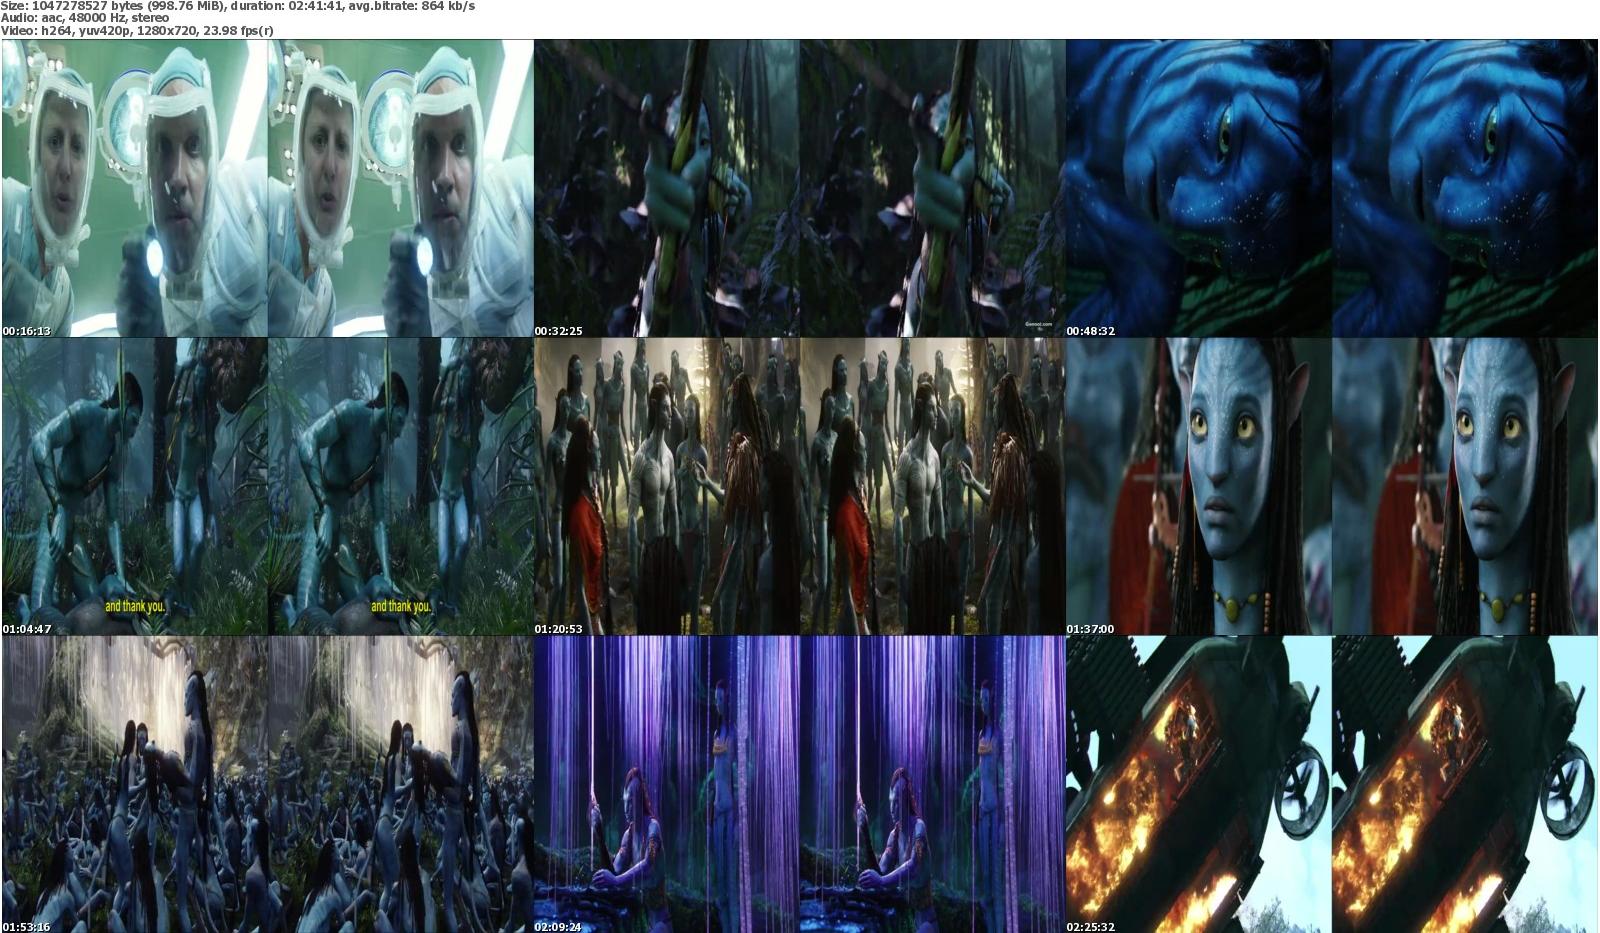 Avatar 3d 2009 Panasonic Exclusive 1080p Blu-ray Iso Download